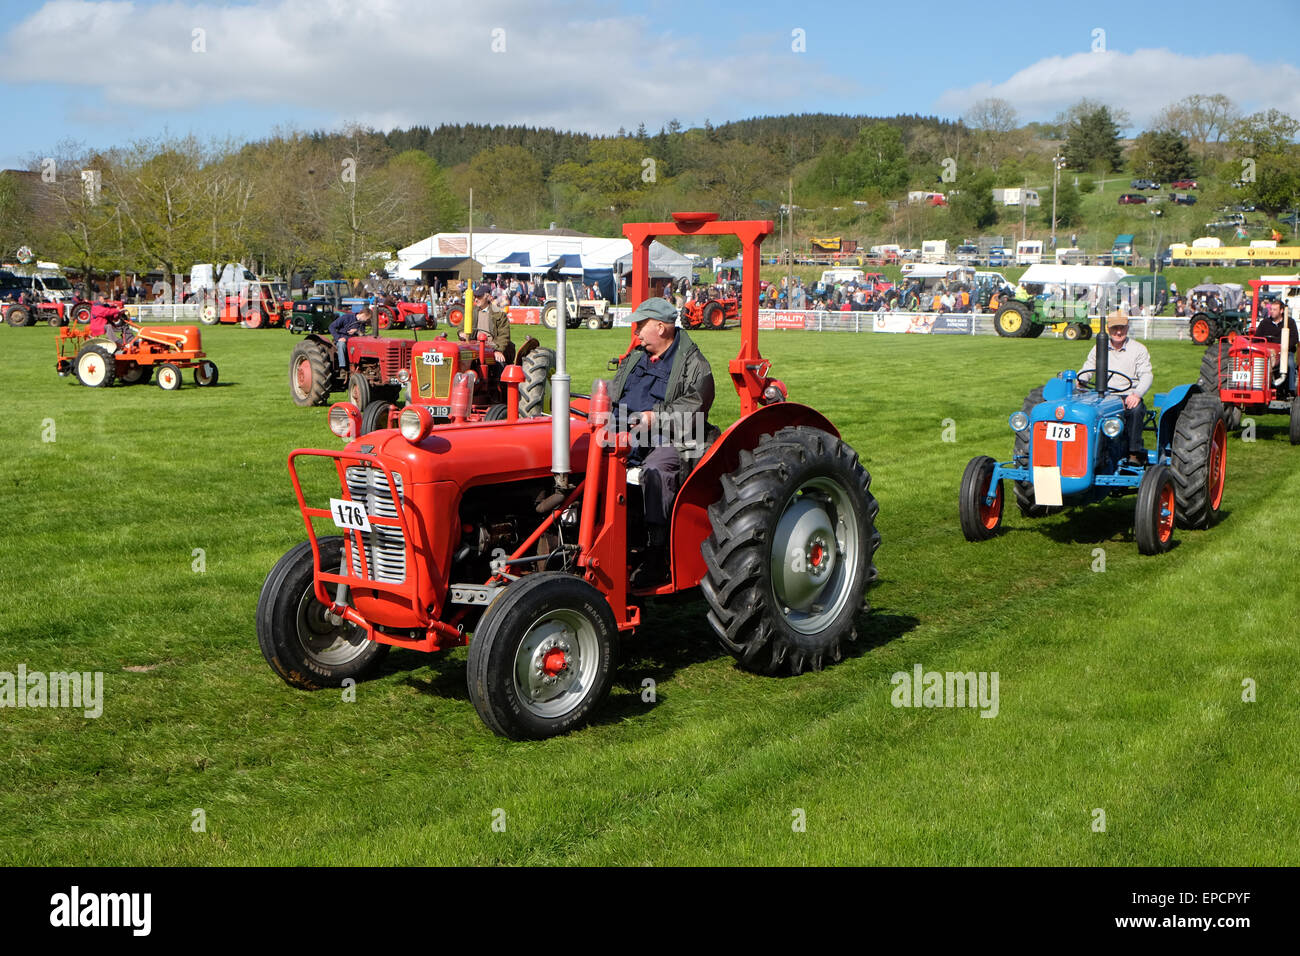 Royal Welsh Spring Festival Builth Wells, Powys, Wales, UK May, 2015. Arena display parade of vintage tractors and vehicles. Over 80 vehicles took part in the procession around the display arena as afternoon sunshine shone on the rural festival showground at Builth Wells. Stock Photo